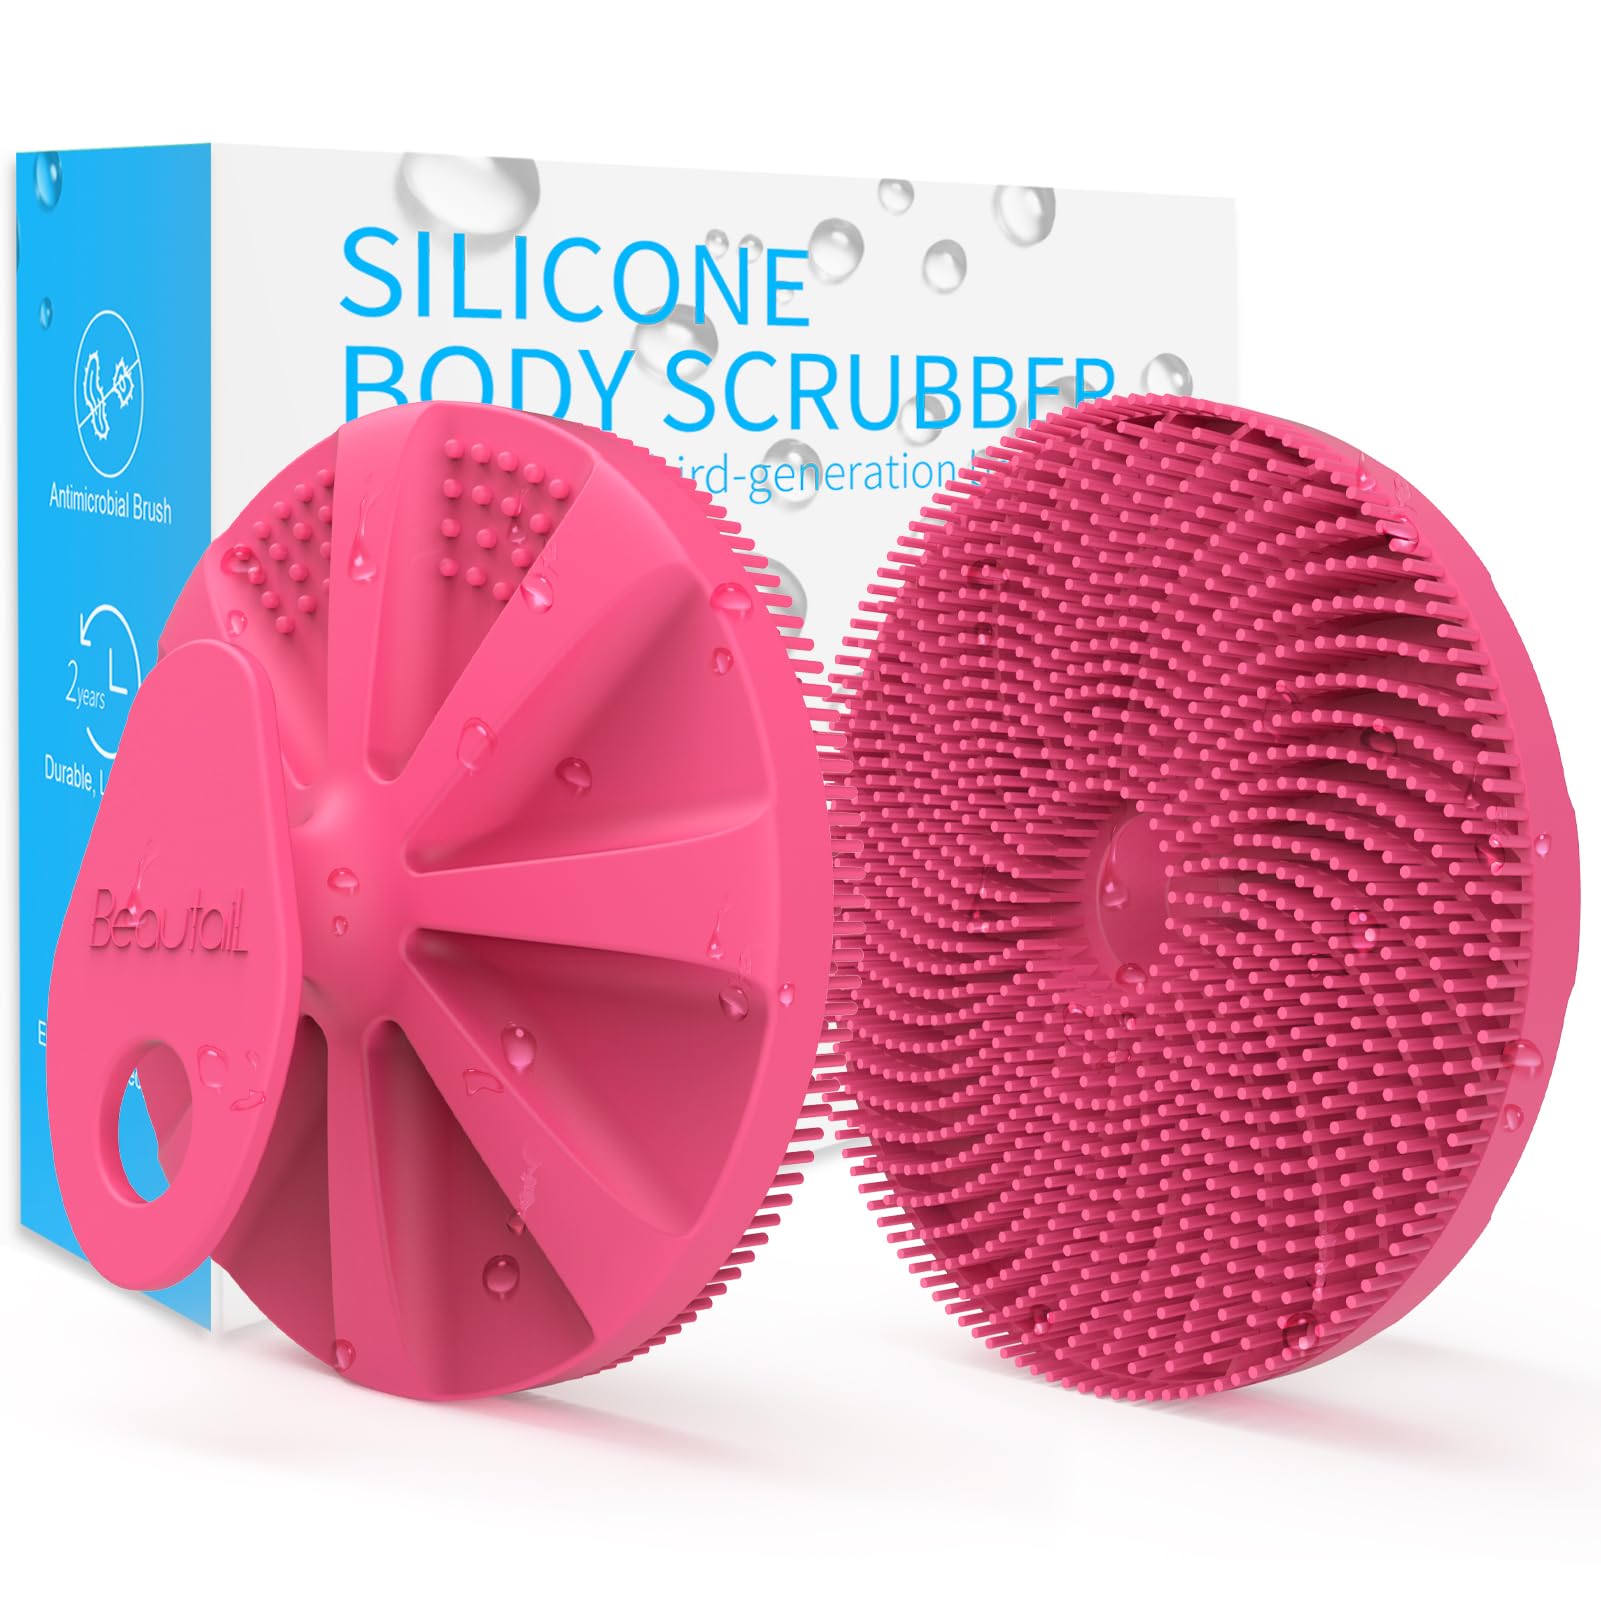 BEAUTAIL Silicone Body Scrubber, Upgrade 3rd Generation Shower Bath Brush, Lather Nicely, Soft Massage Body, More Hygienic Than Traditional Loofah, Gentle Exfoliating for Sensitive Skin, 1 Pack, Rose